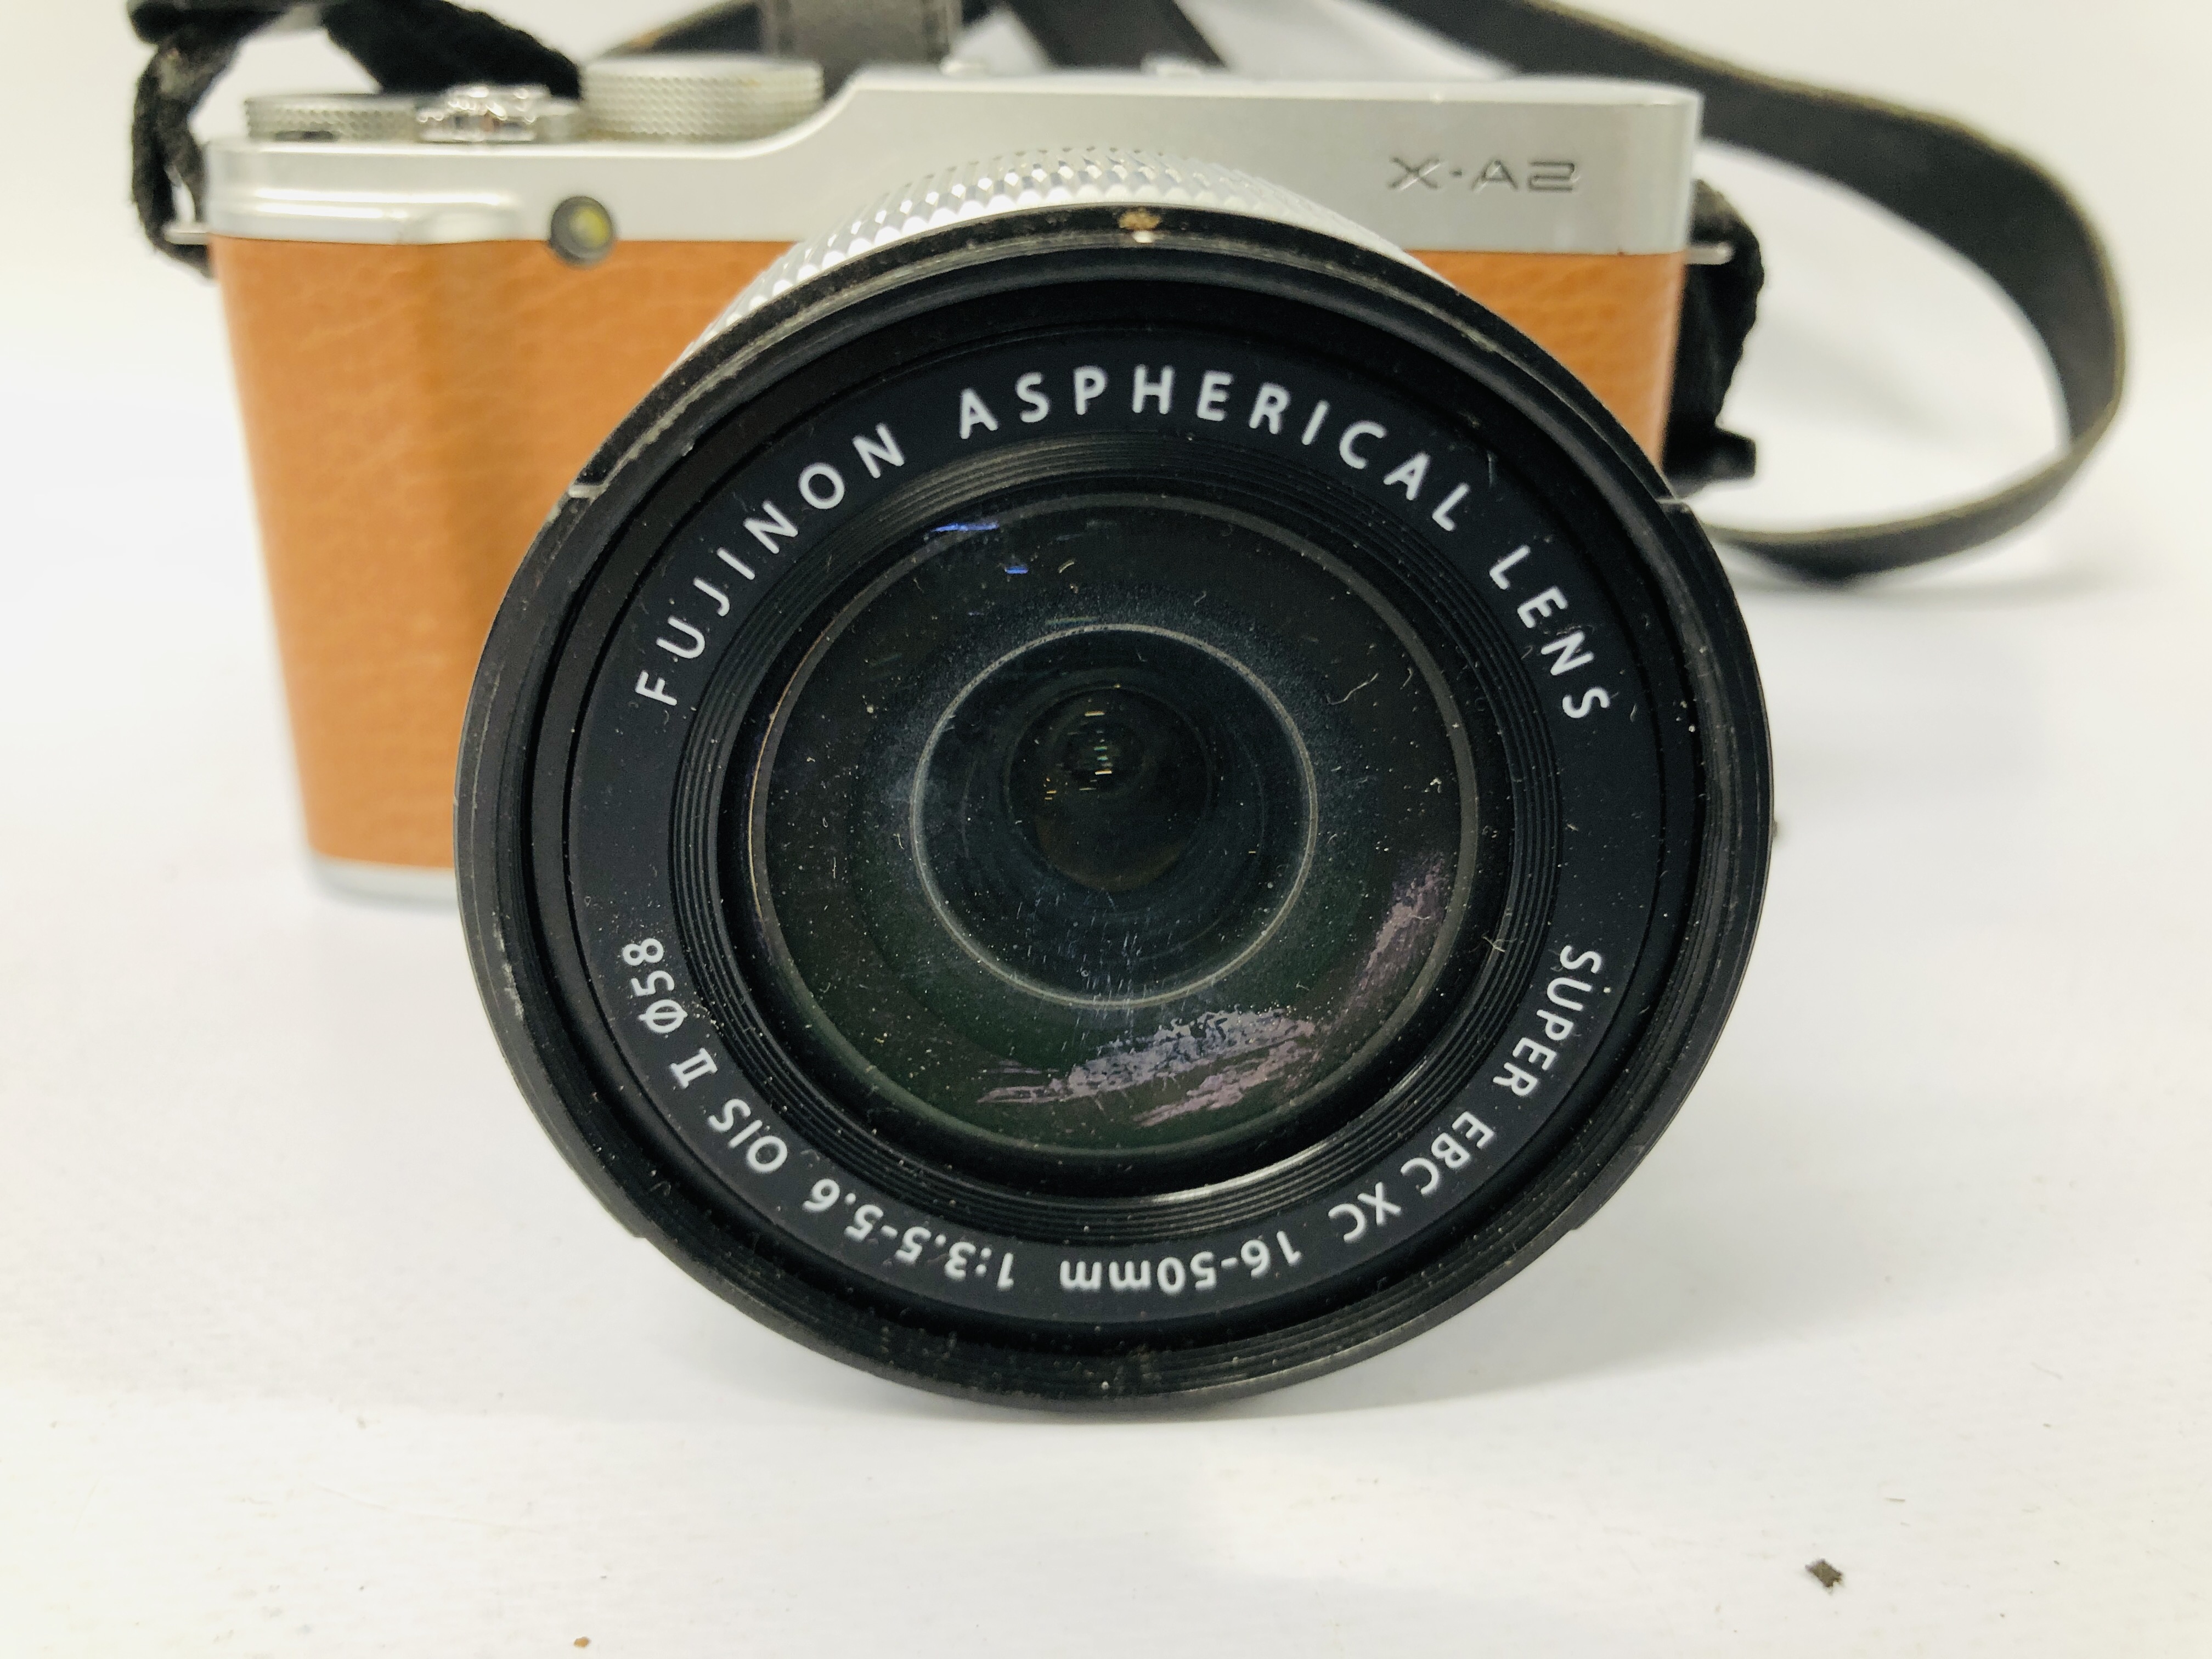 FUJIFILM X-A2 DIGITAL CAMERA FITTED WITH FUJIFILM XC 16-50 MM LENS (NO BATTERY) S/N 55L04338 - SOLD - Image 2 of 5